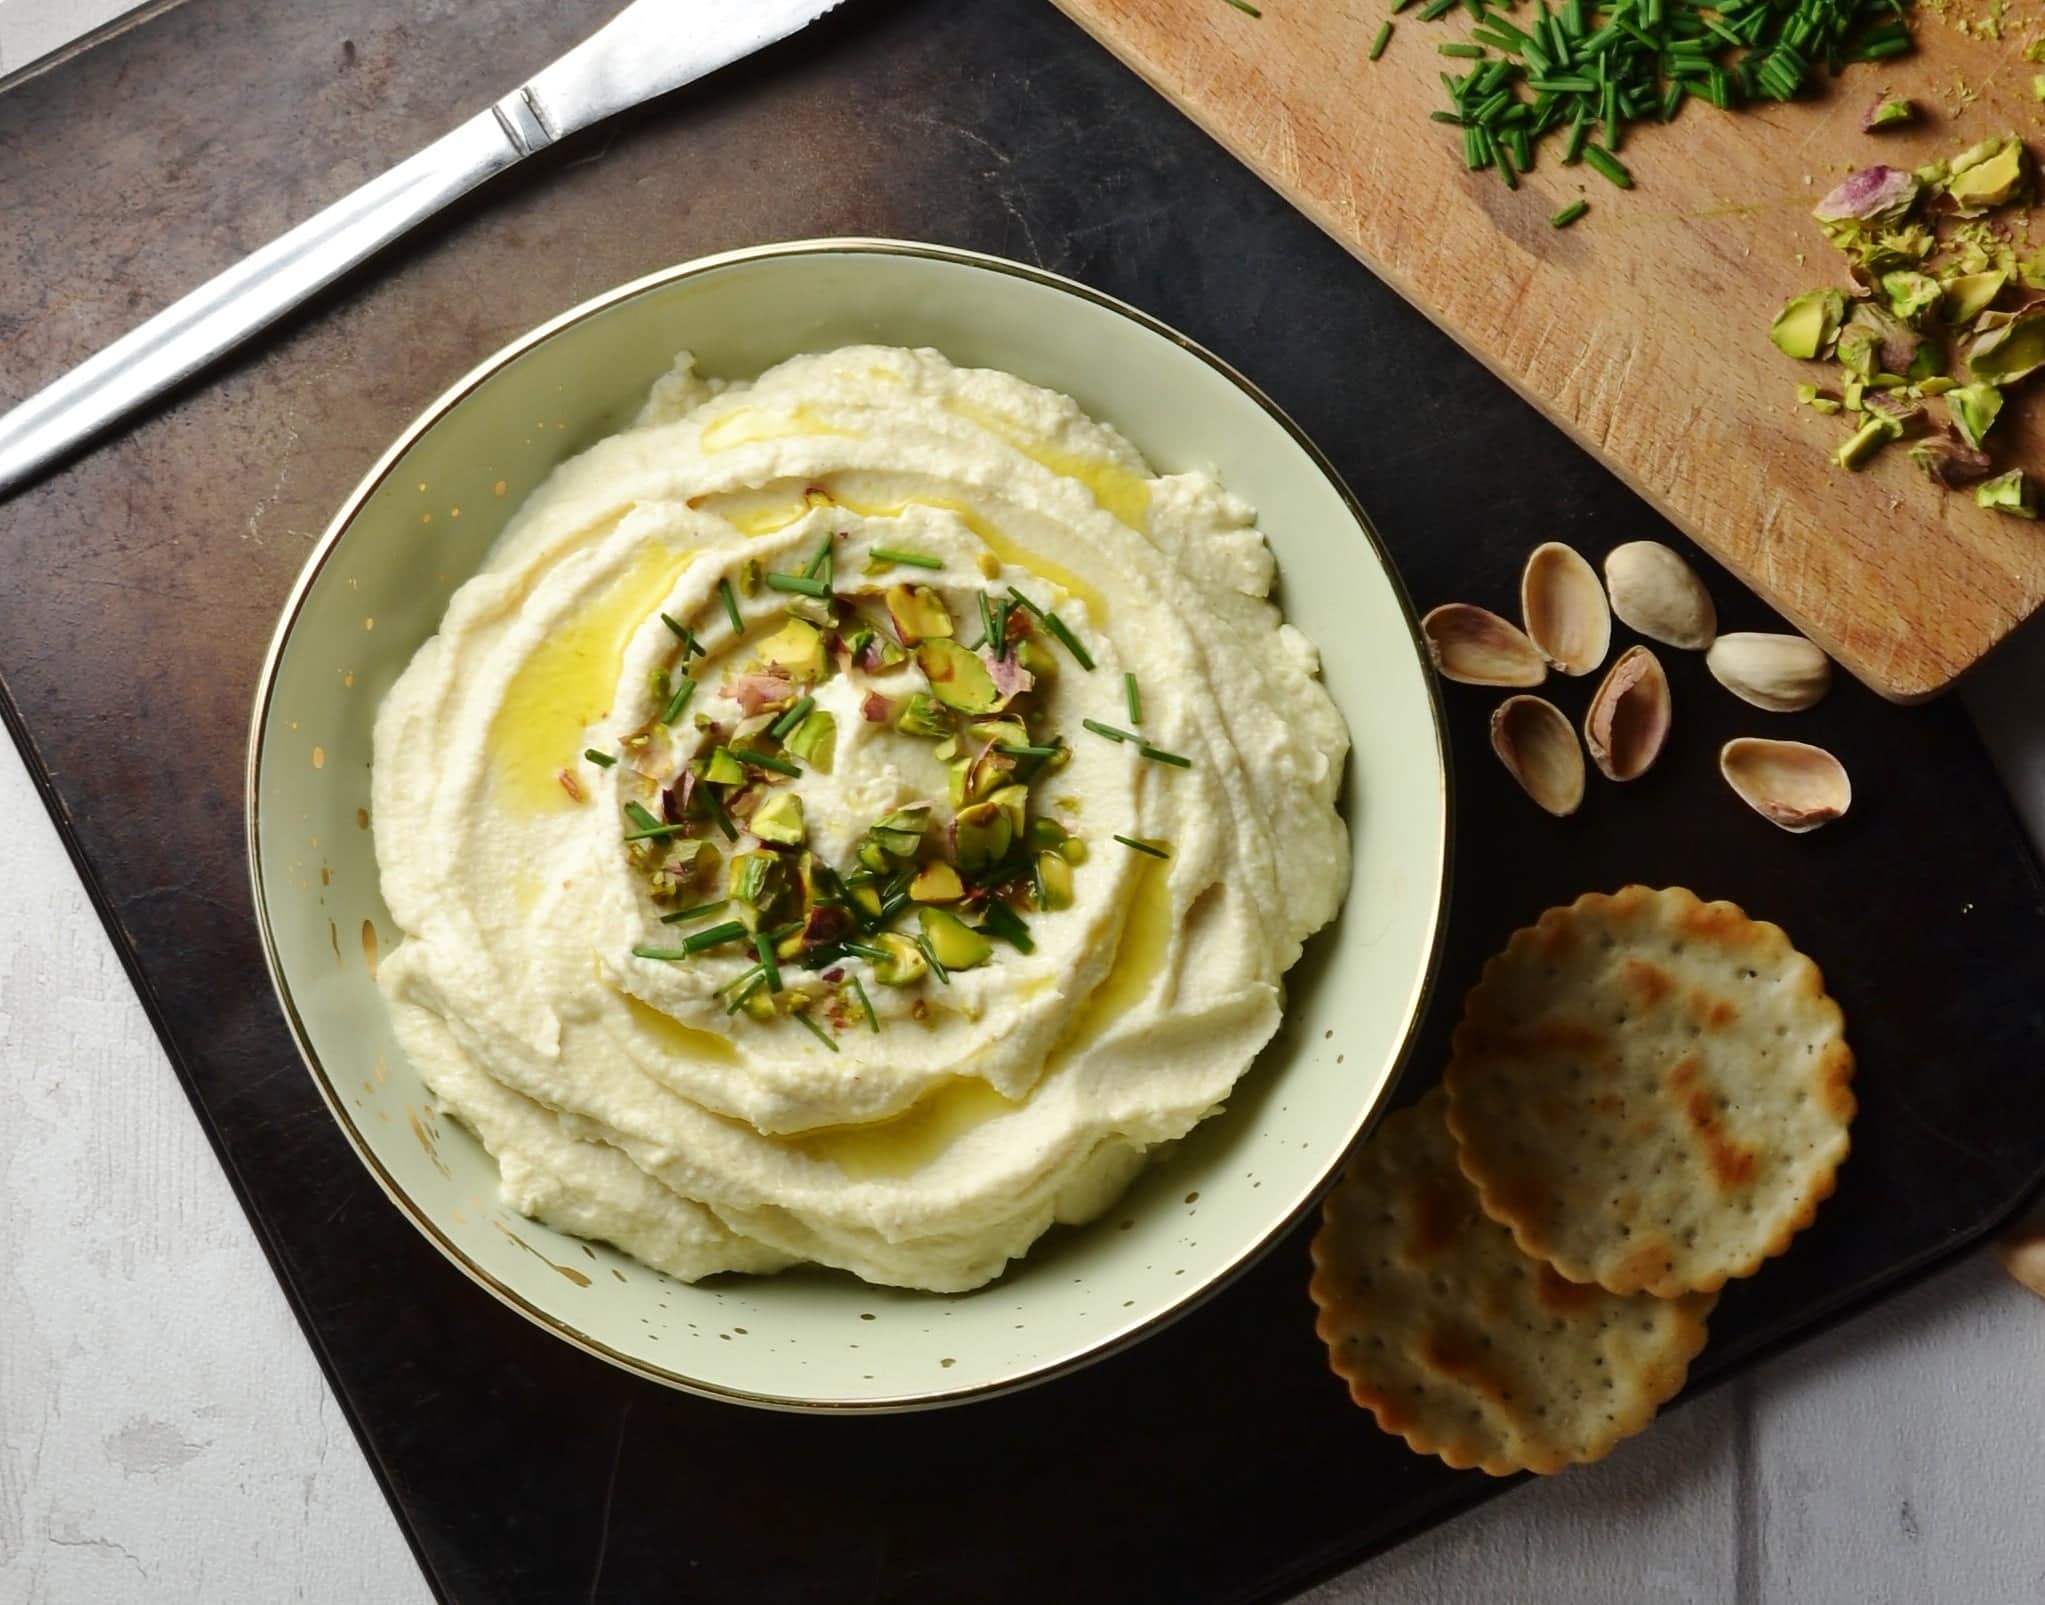 Top down view of cauliflower dip in cream bowl on top of tray with crackers, nuts, herbs and knife in background.. 